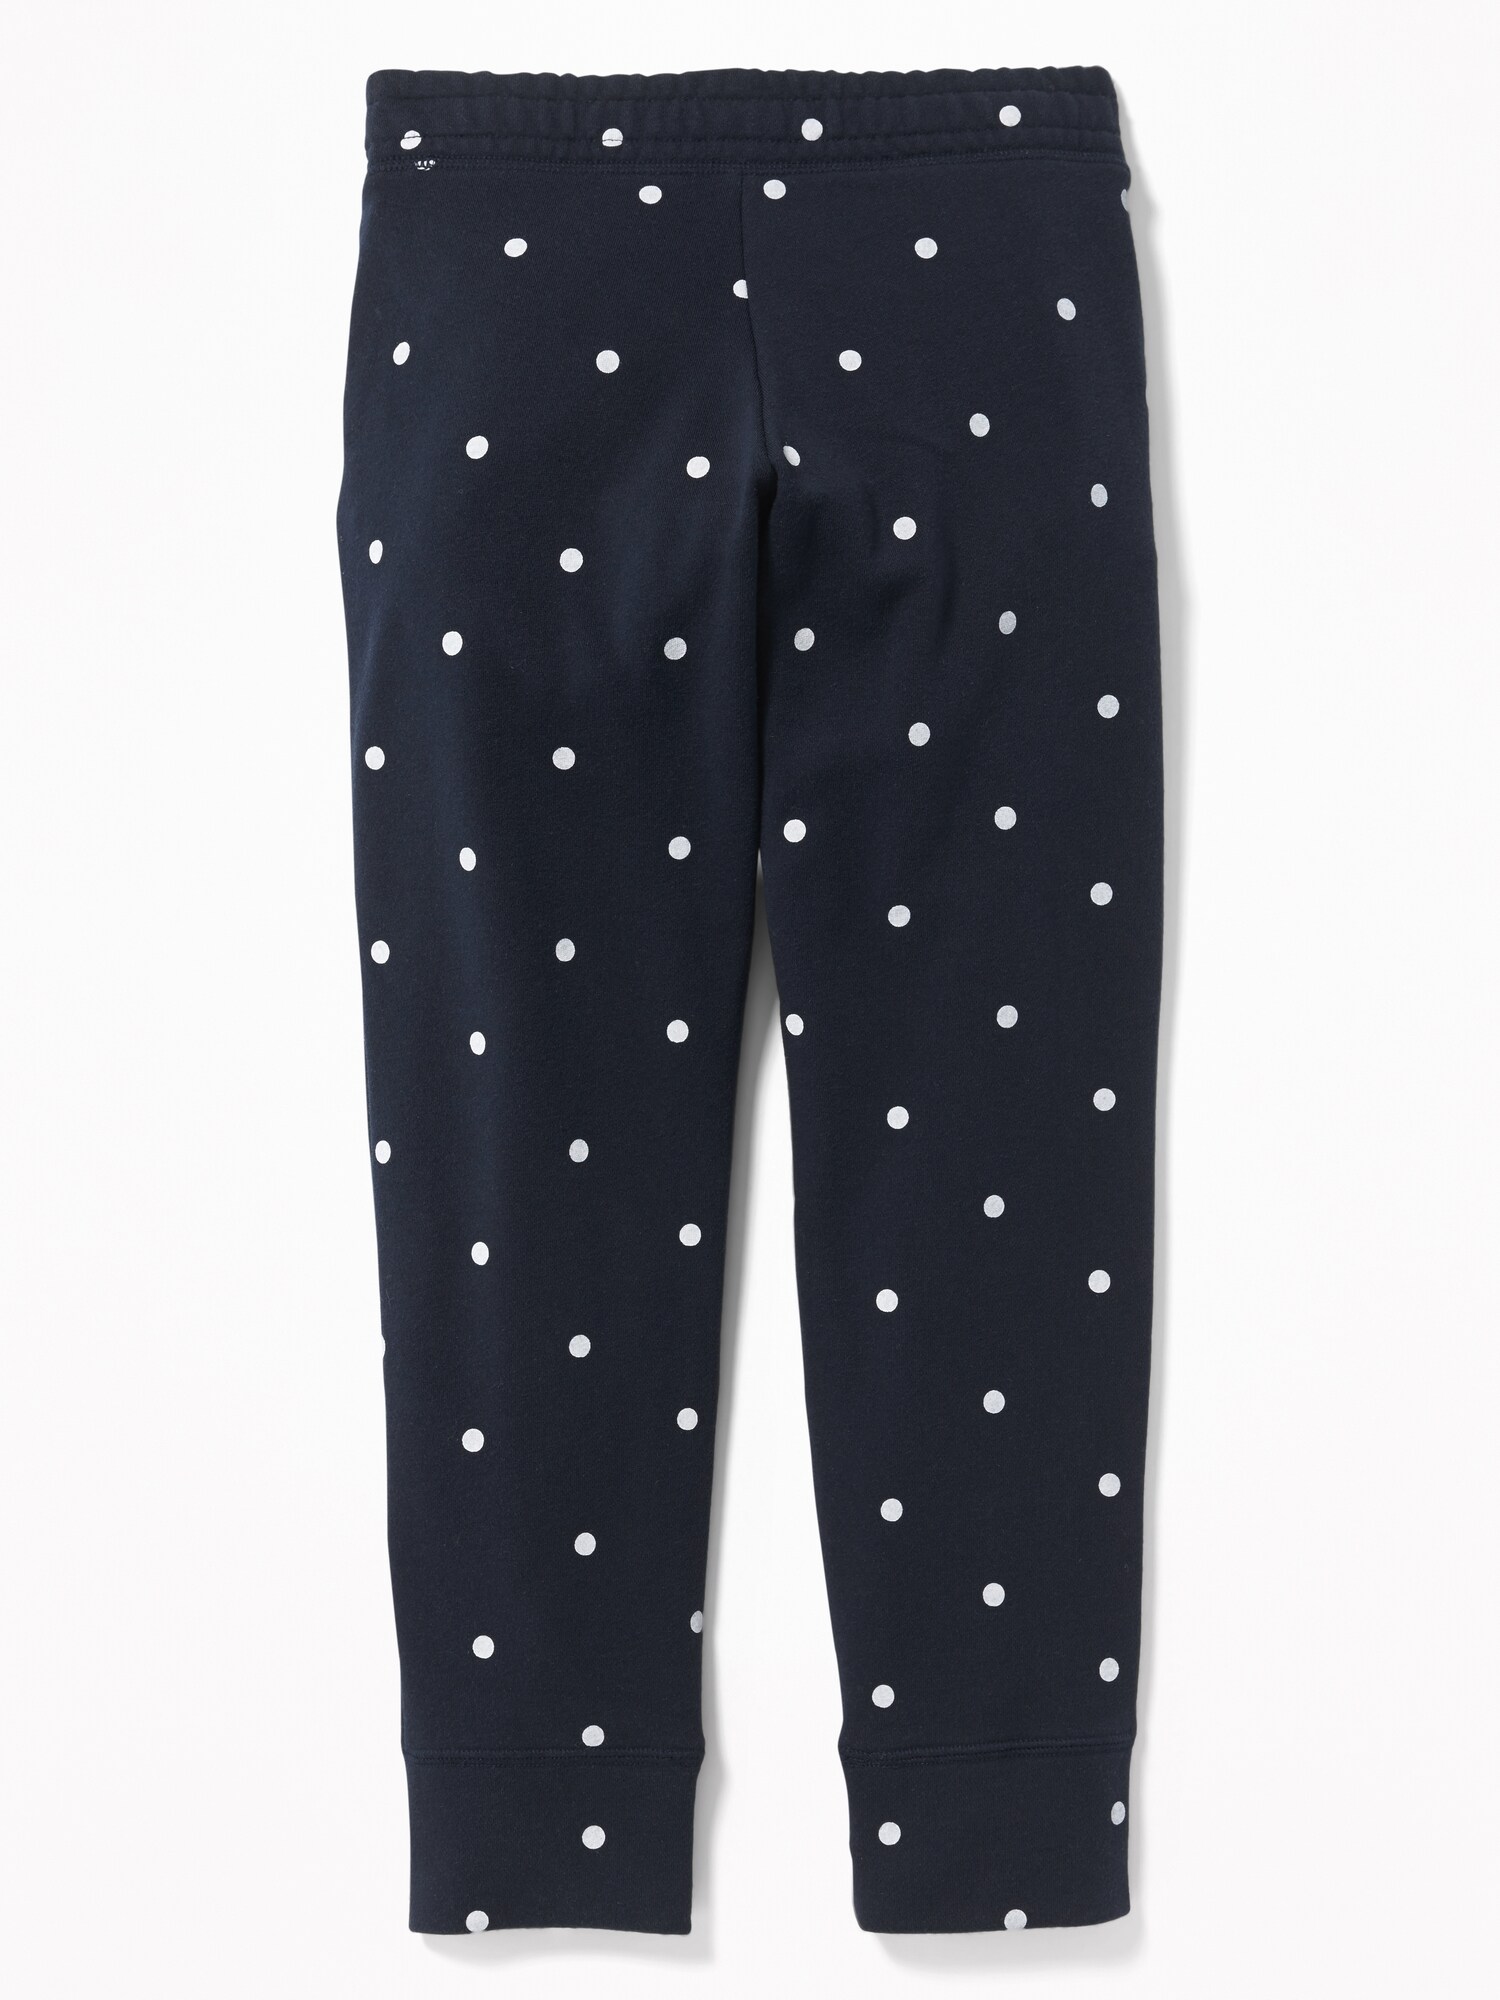 Logo-Graphic Joggers for Girls | Old Navy